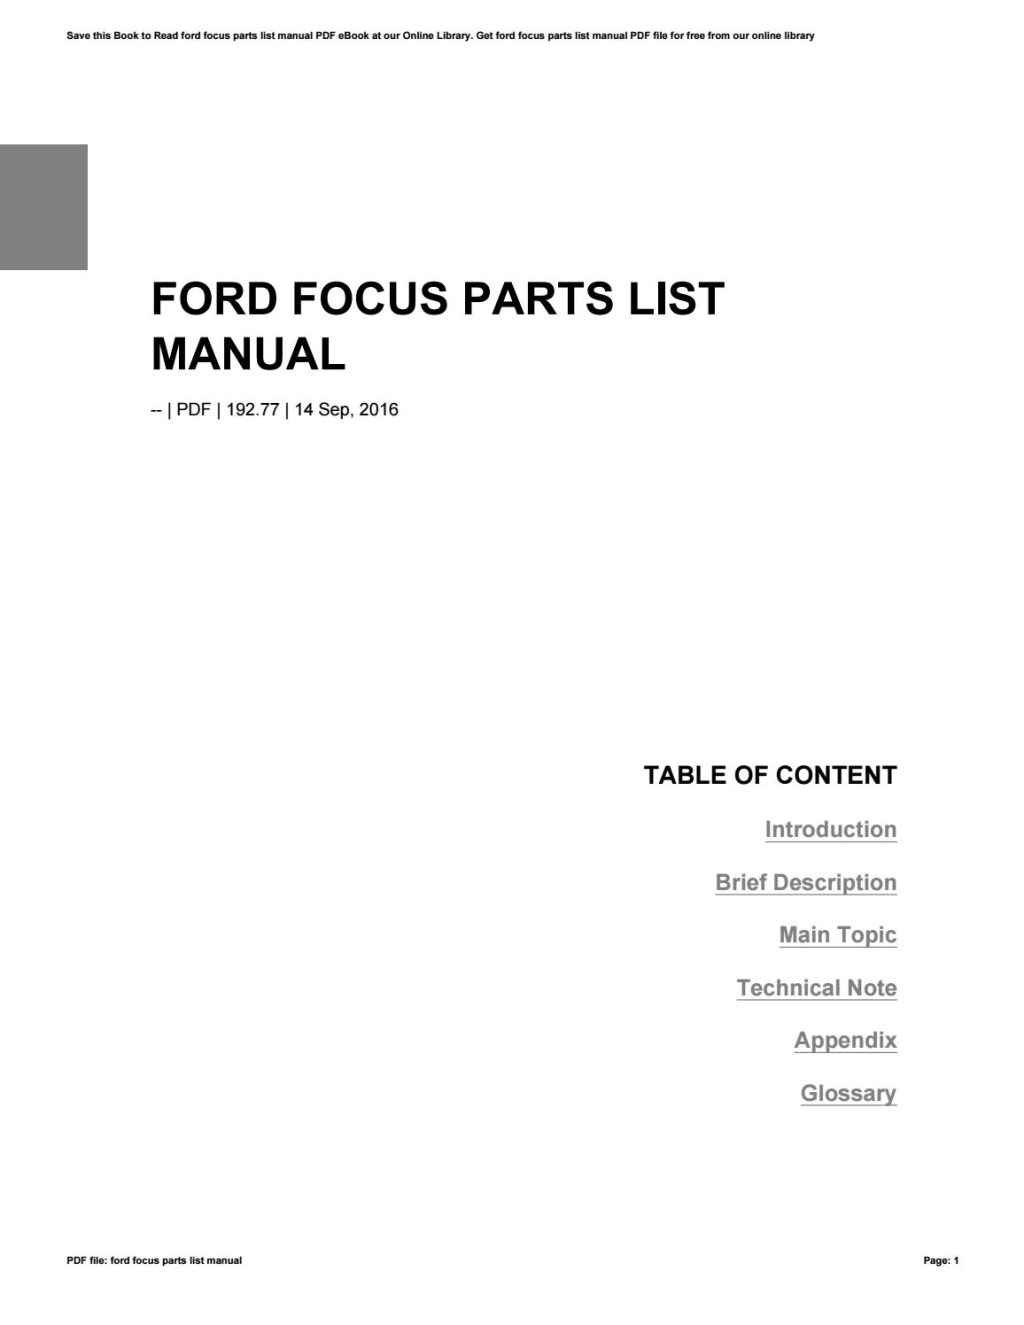 Picture of: Ford focus parts list manual by zhcne – Issuu